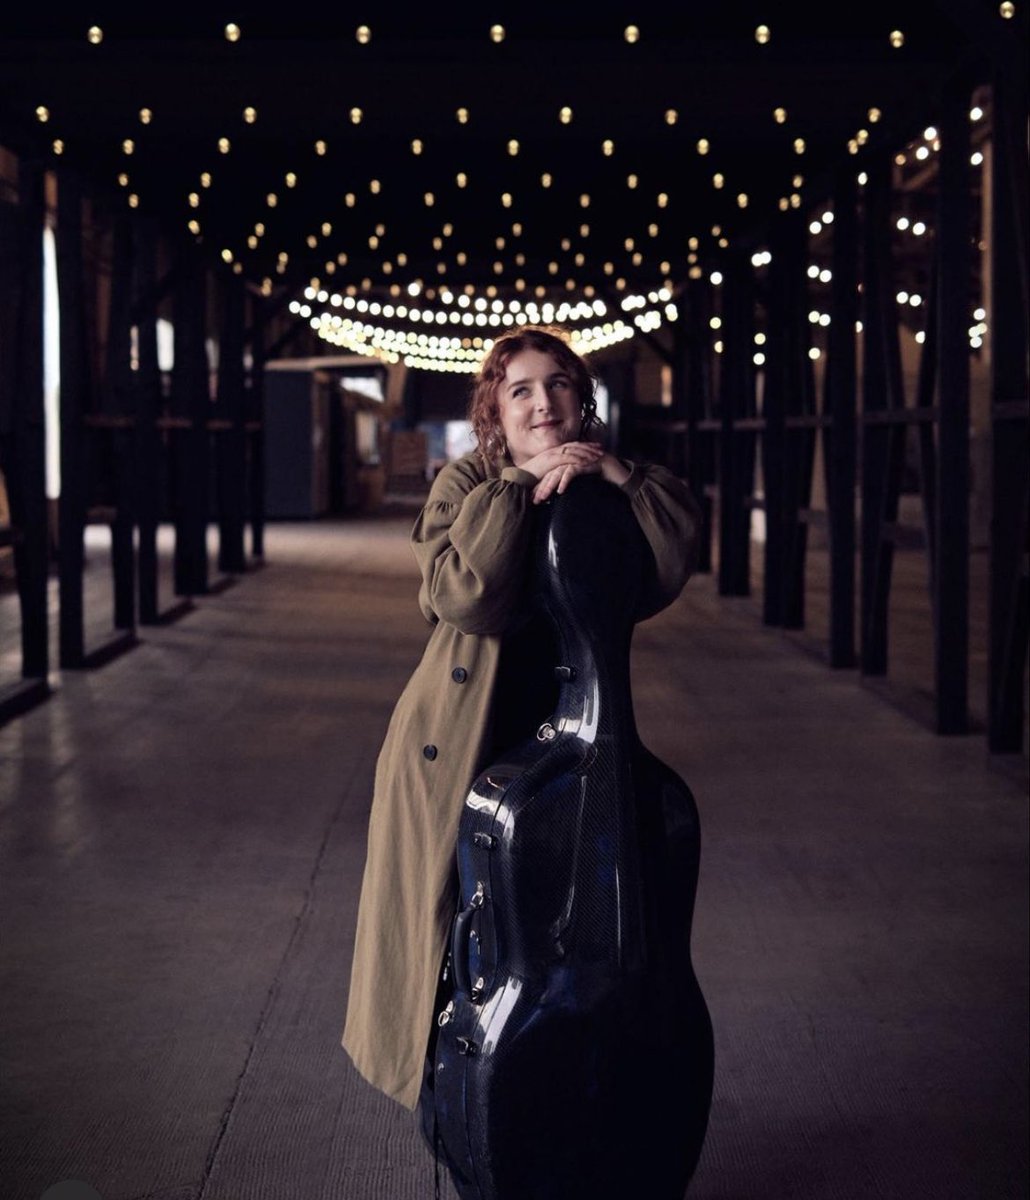 Cellist Yseult Cooper-Stockdale will perform in our new Half Moon Place café today at 1pm as part of our summer series of concerts. Drop in and enjoy! Admission is free!